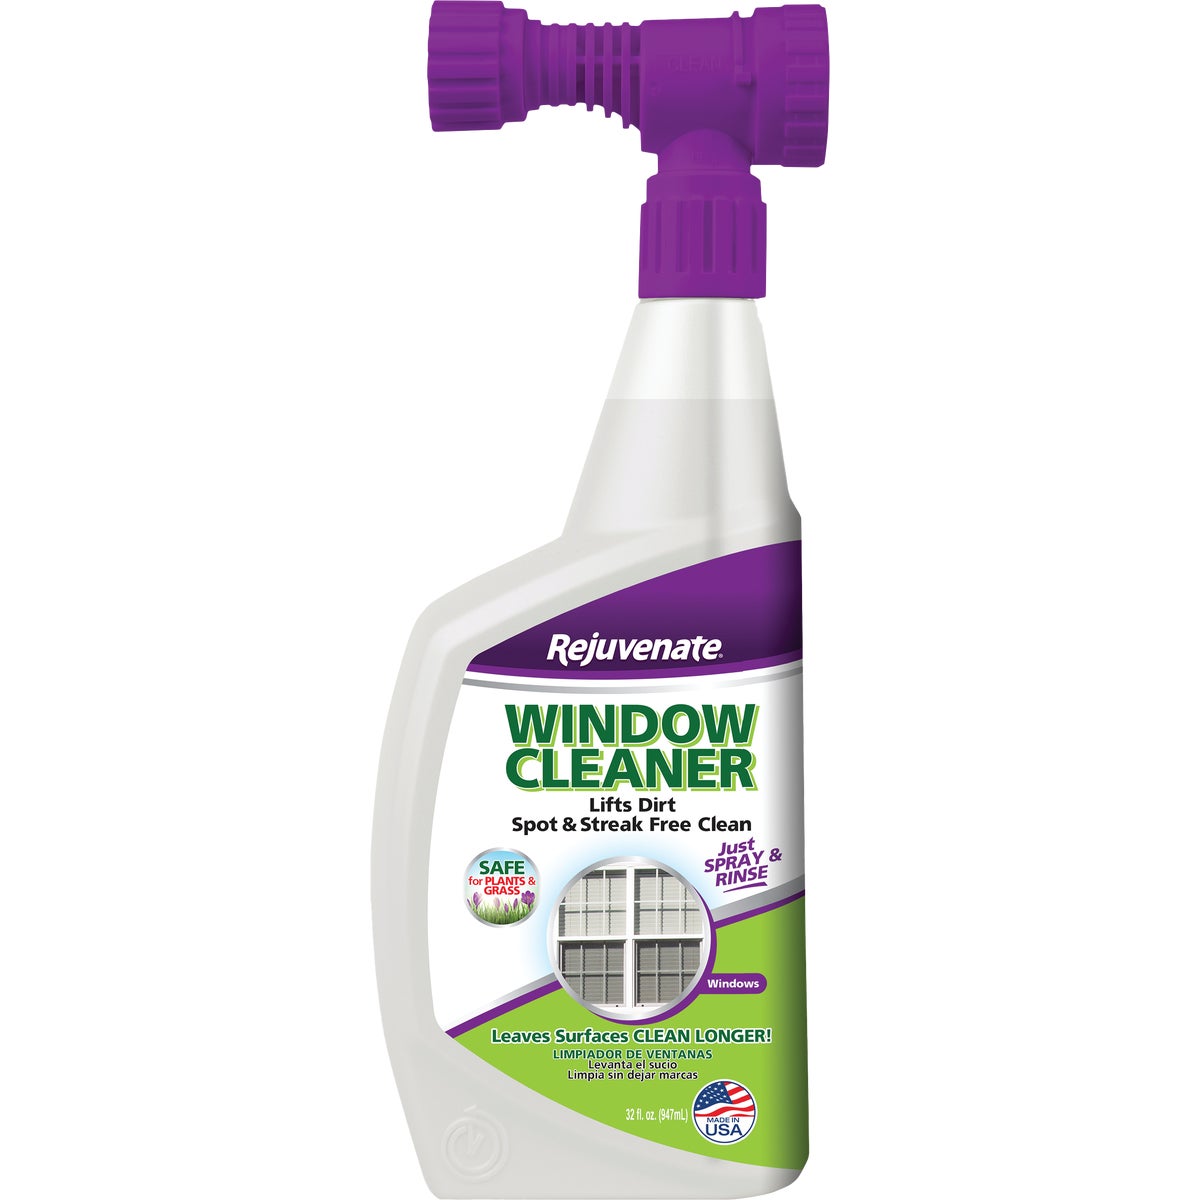 Item 602563, Rejuvenate Outdoor Window and Surface Cleaner is a concentrated non-scrub 